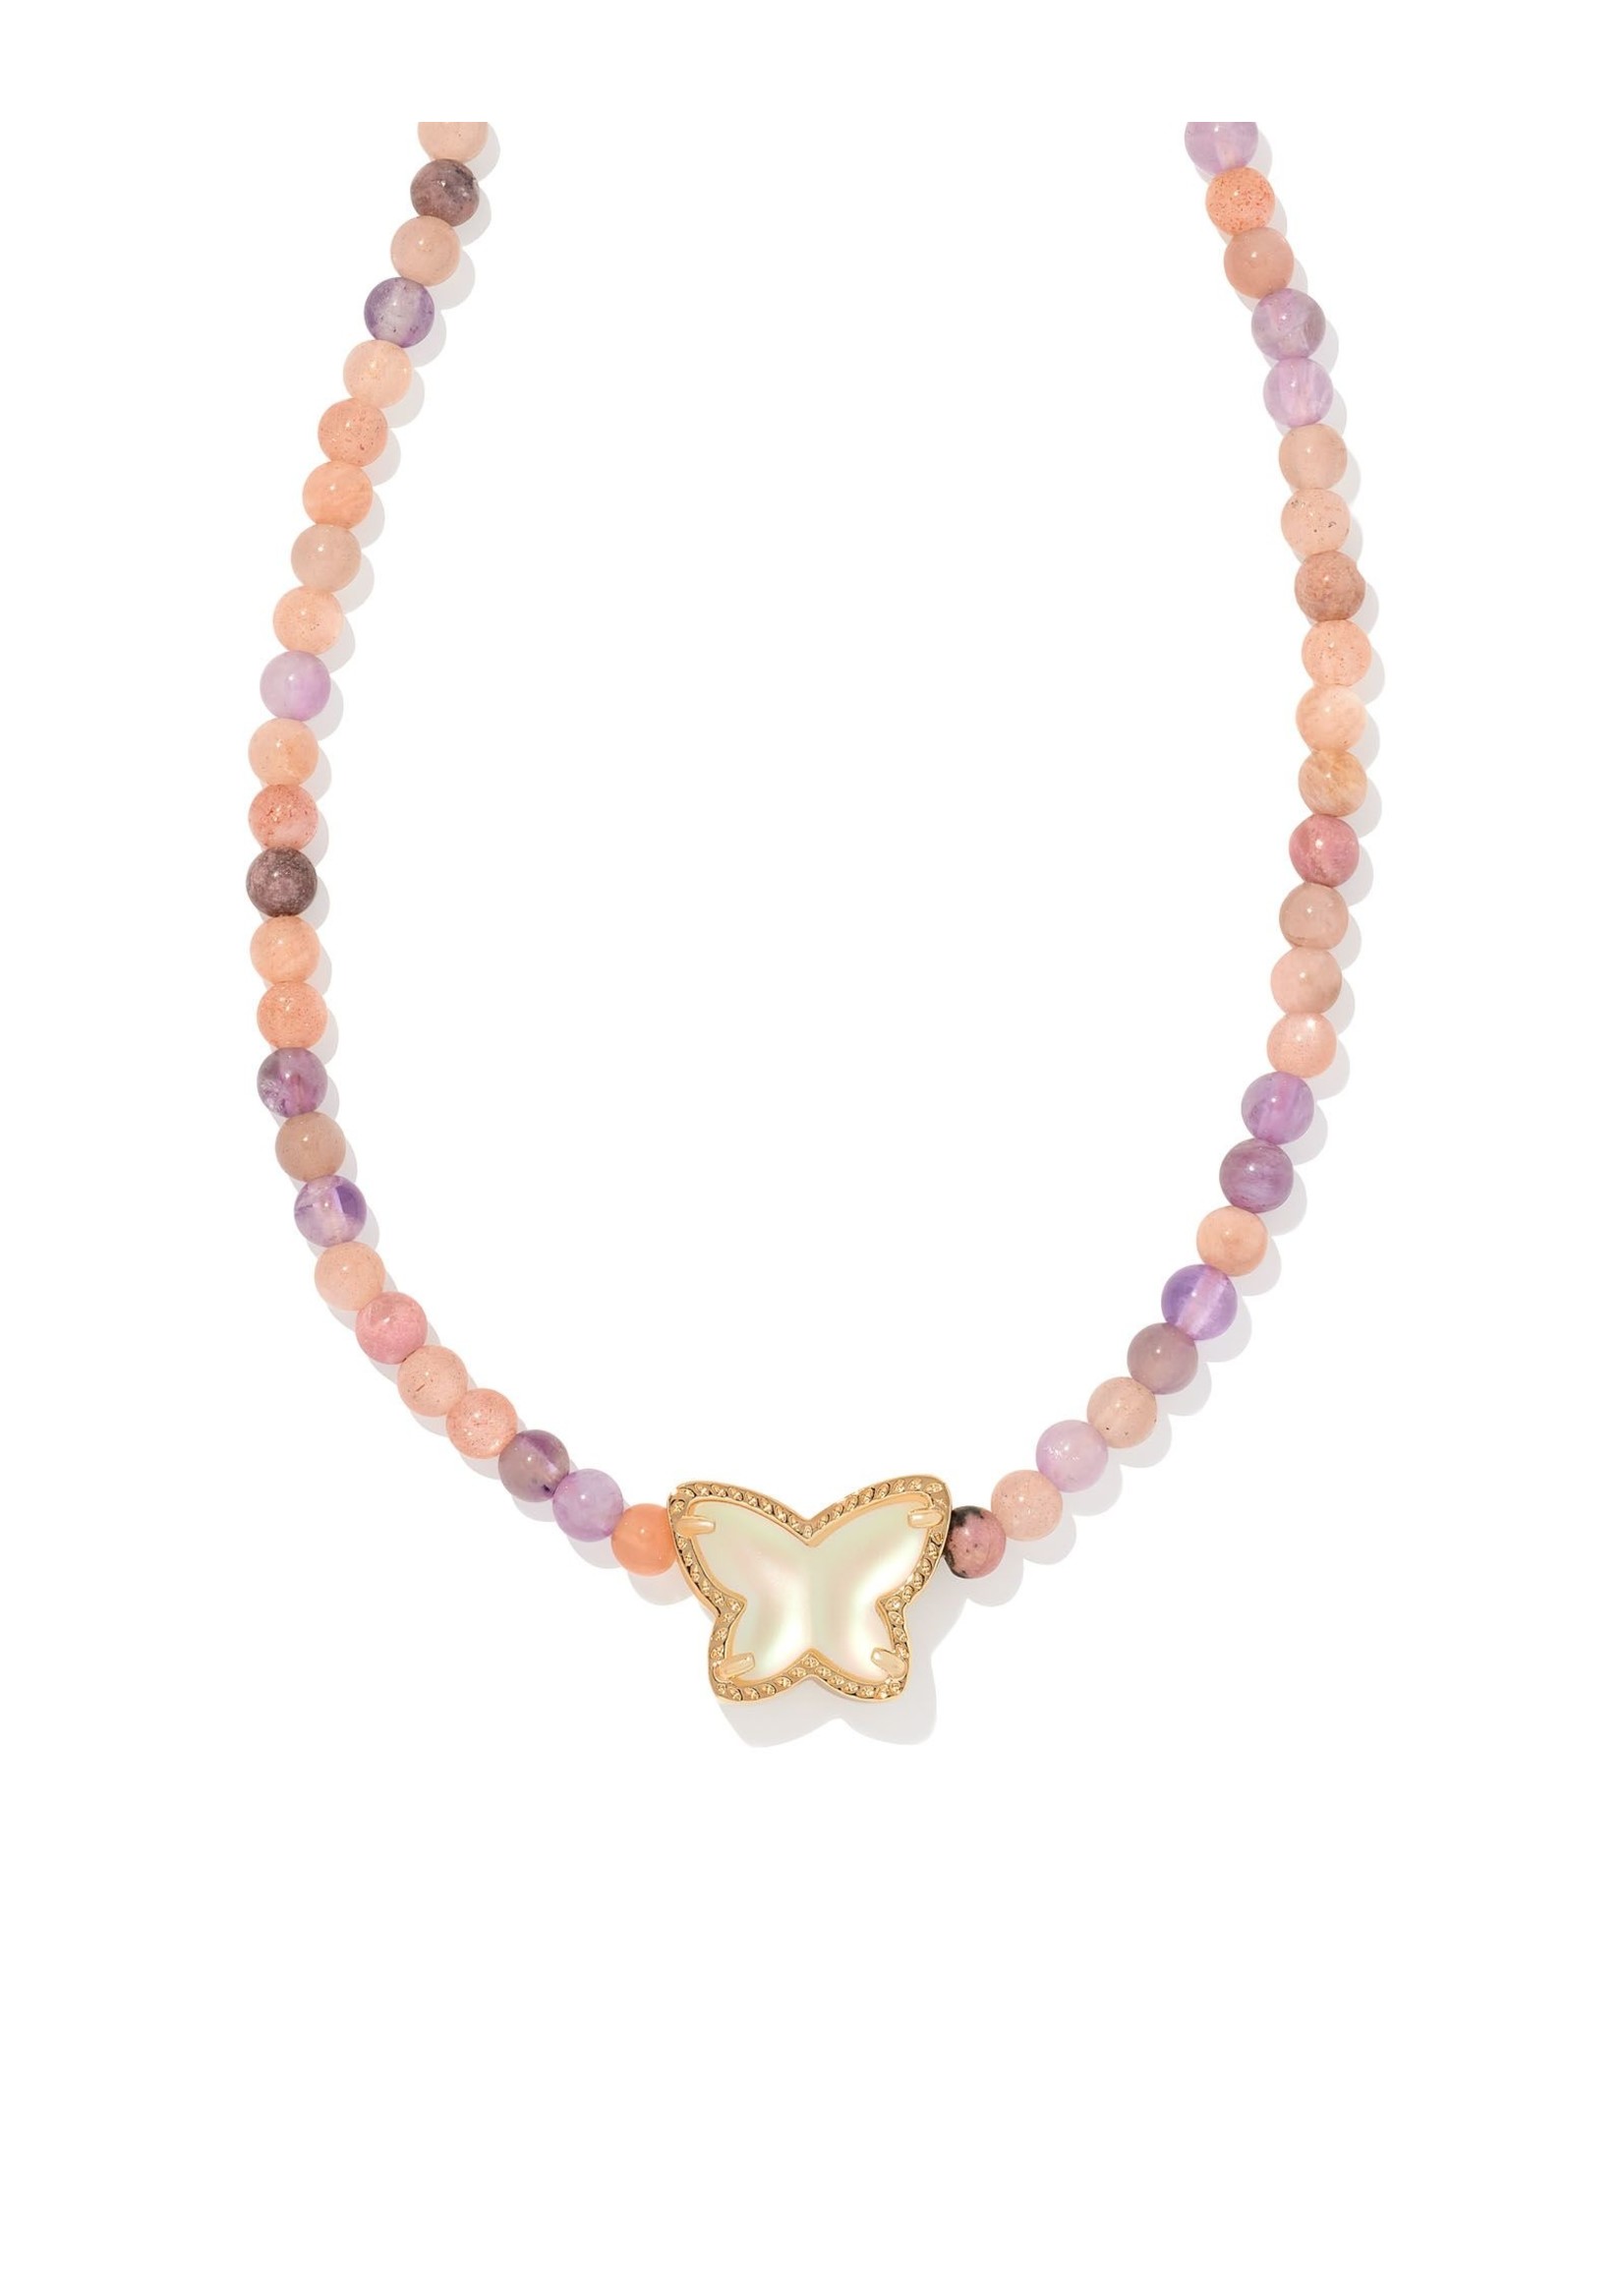 The Beaded Lillia Gold Necklace